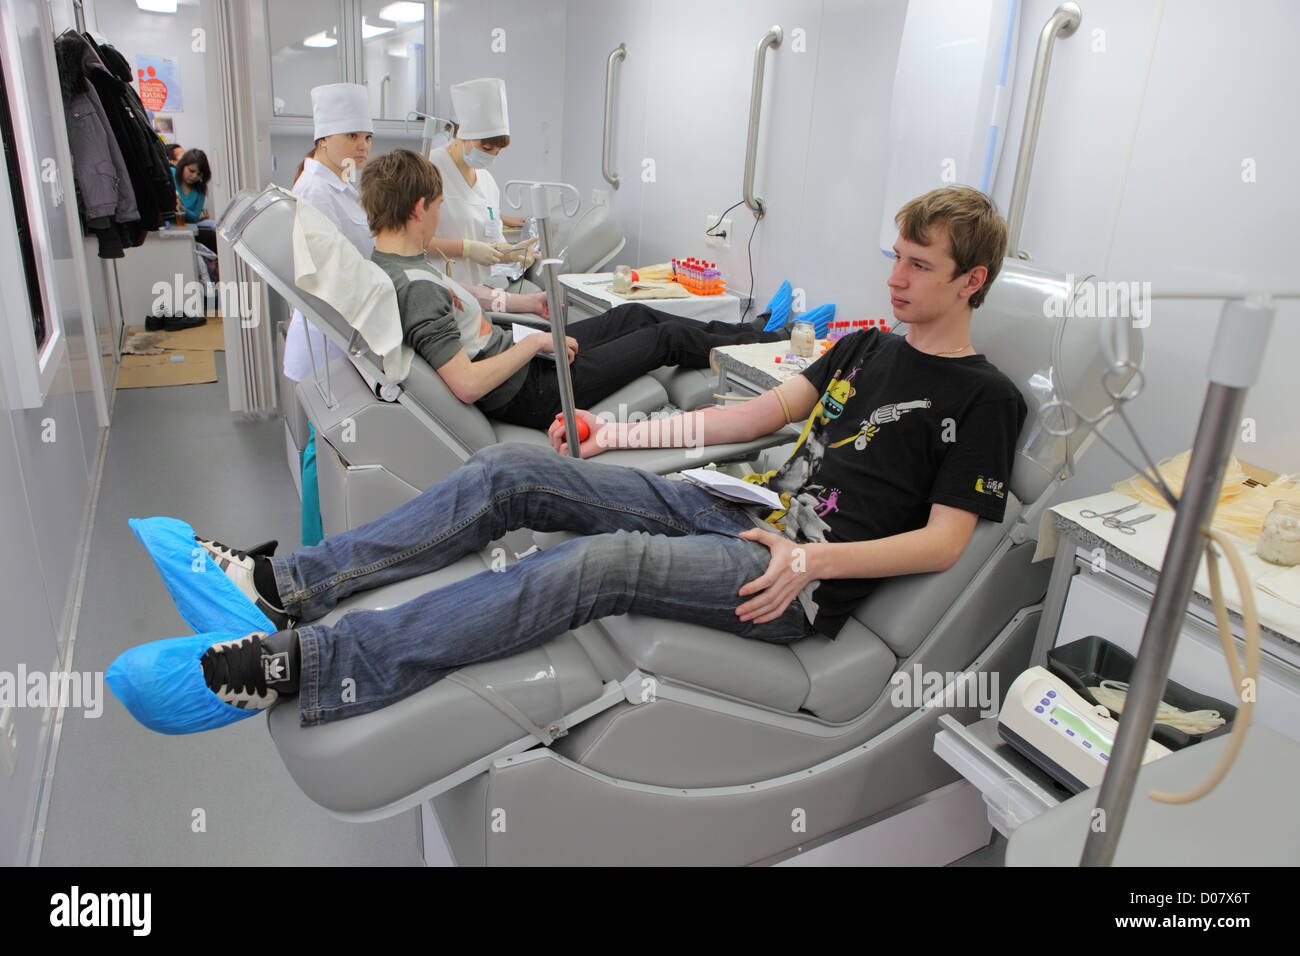 Volunteer take part in free blood donation campaign Stock Photo